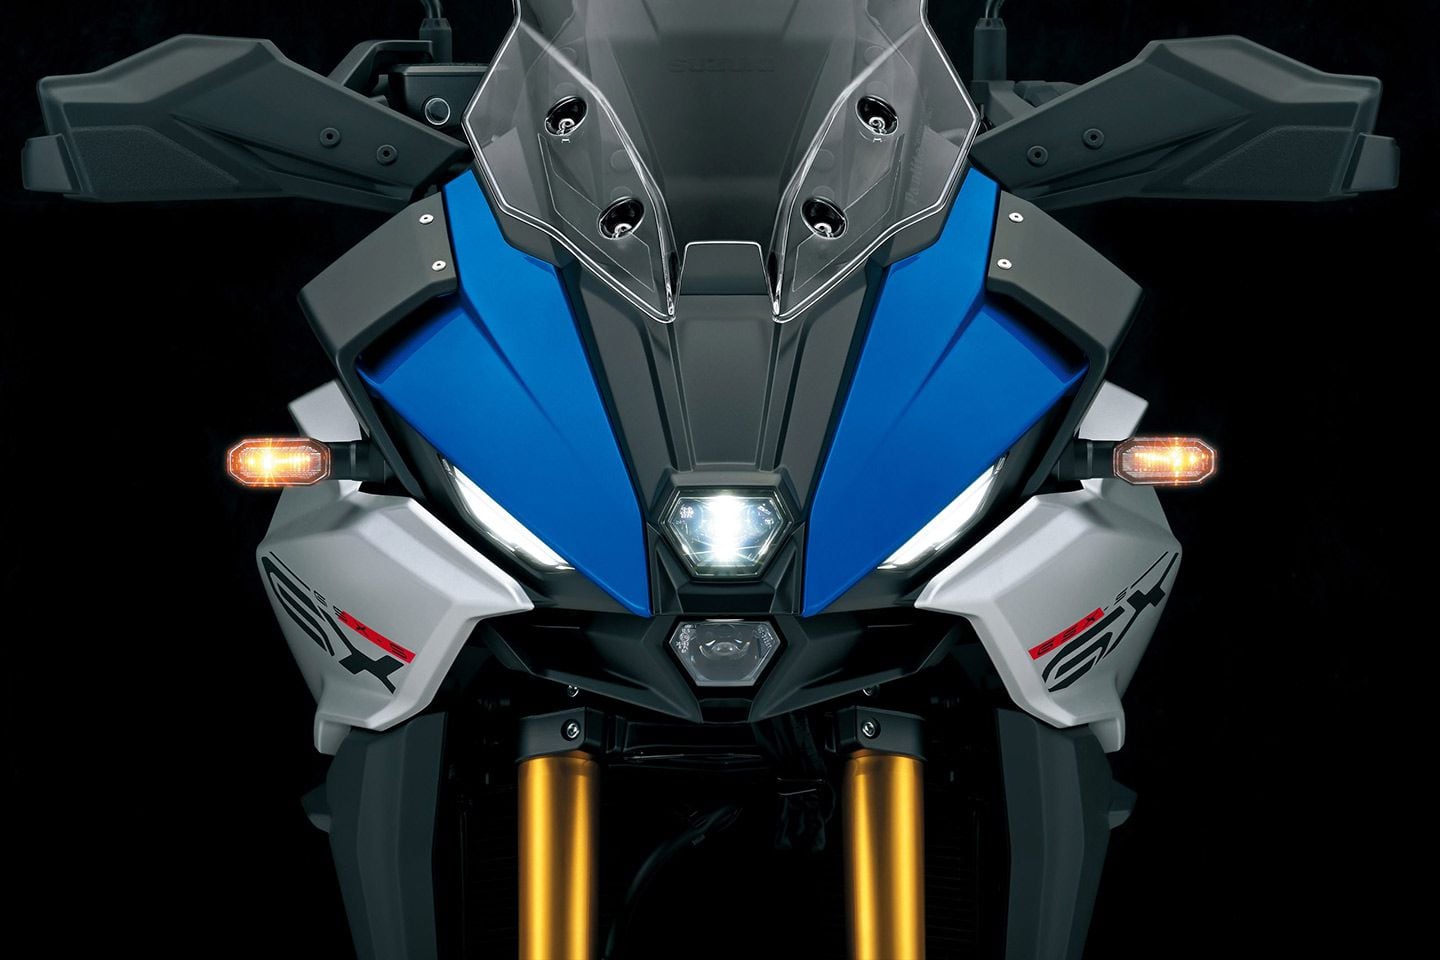 The stacked headlights resemble the rest of Suzuki’s family members.